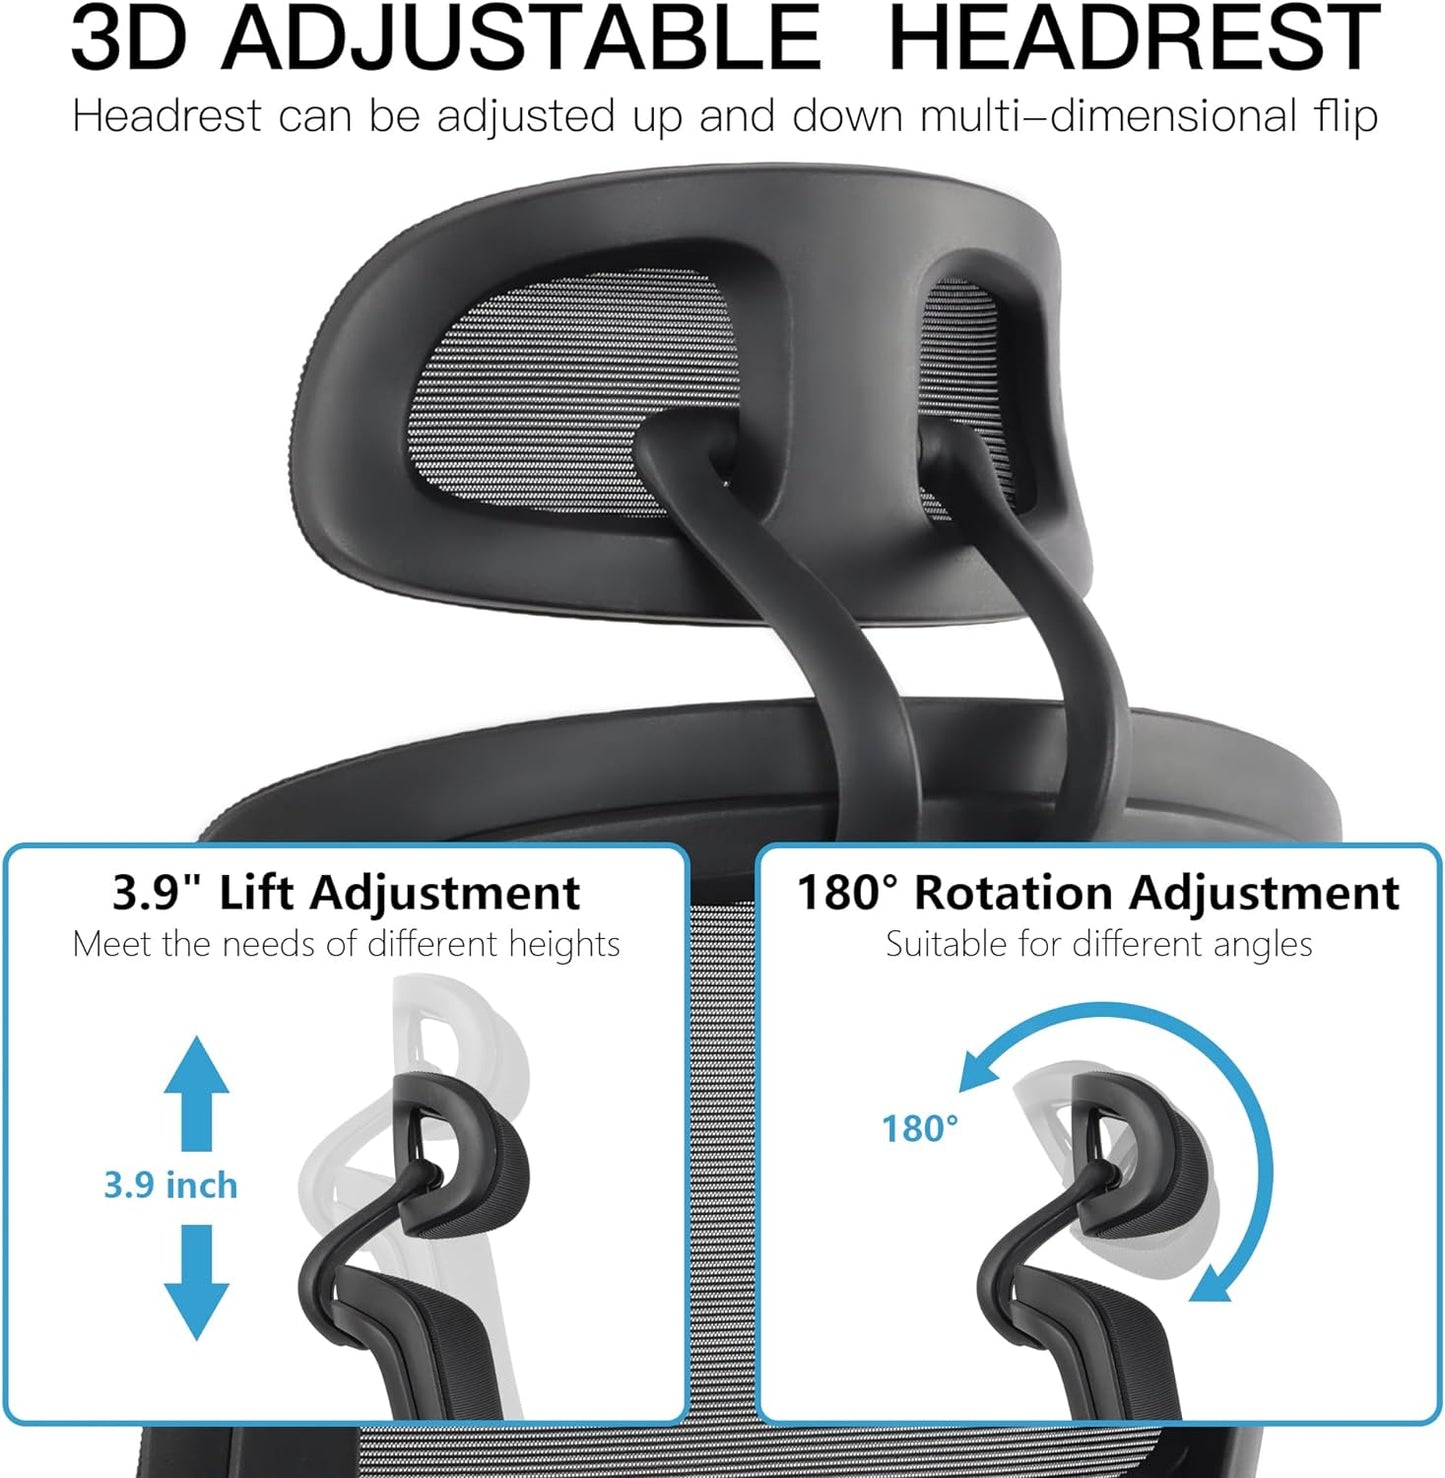 Ergonomic Office Desk Chair, High Back Mesh Chair with 3D Lumbar Support, Comfortable Computer Task Chair with Adjustable Armrest & Headrest, Wide Foam Seat, Swivel Chair for Home,Office & Stud